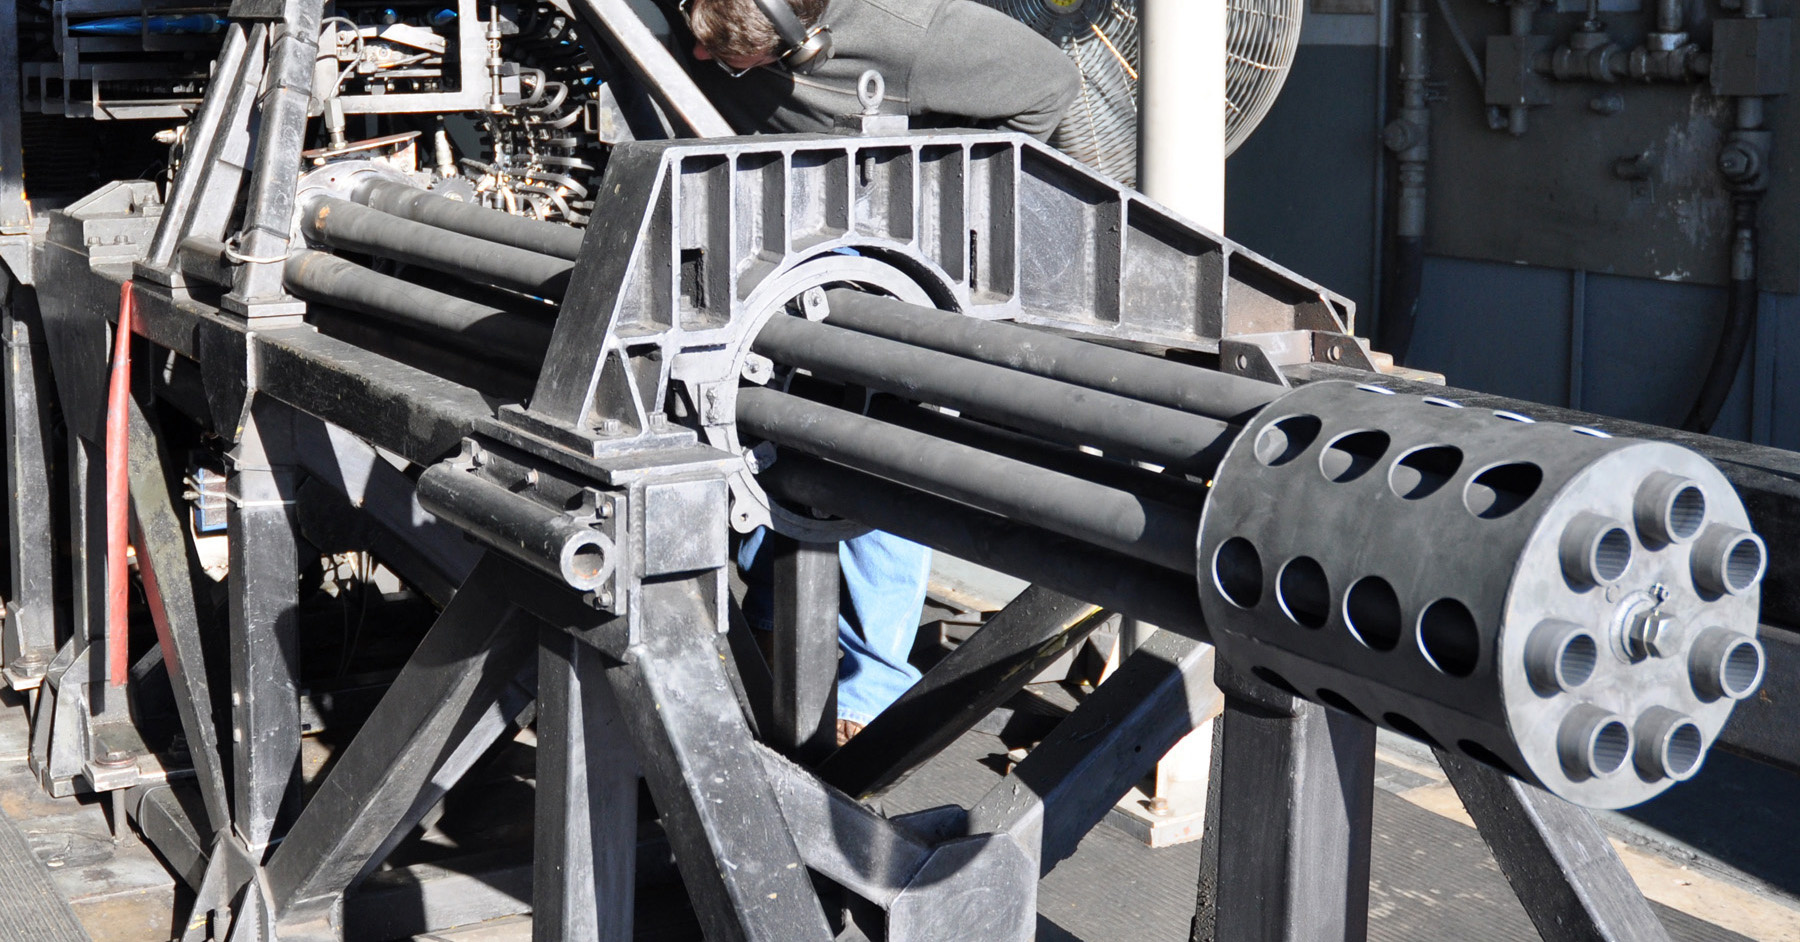 This deadly gun is the Navy’s last line of defense against a missile attack